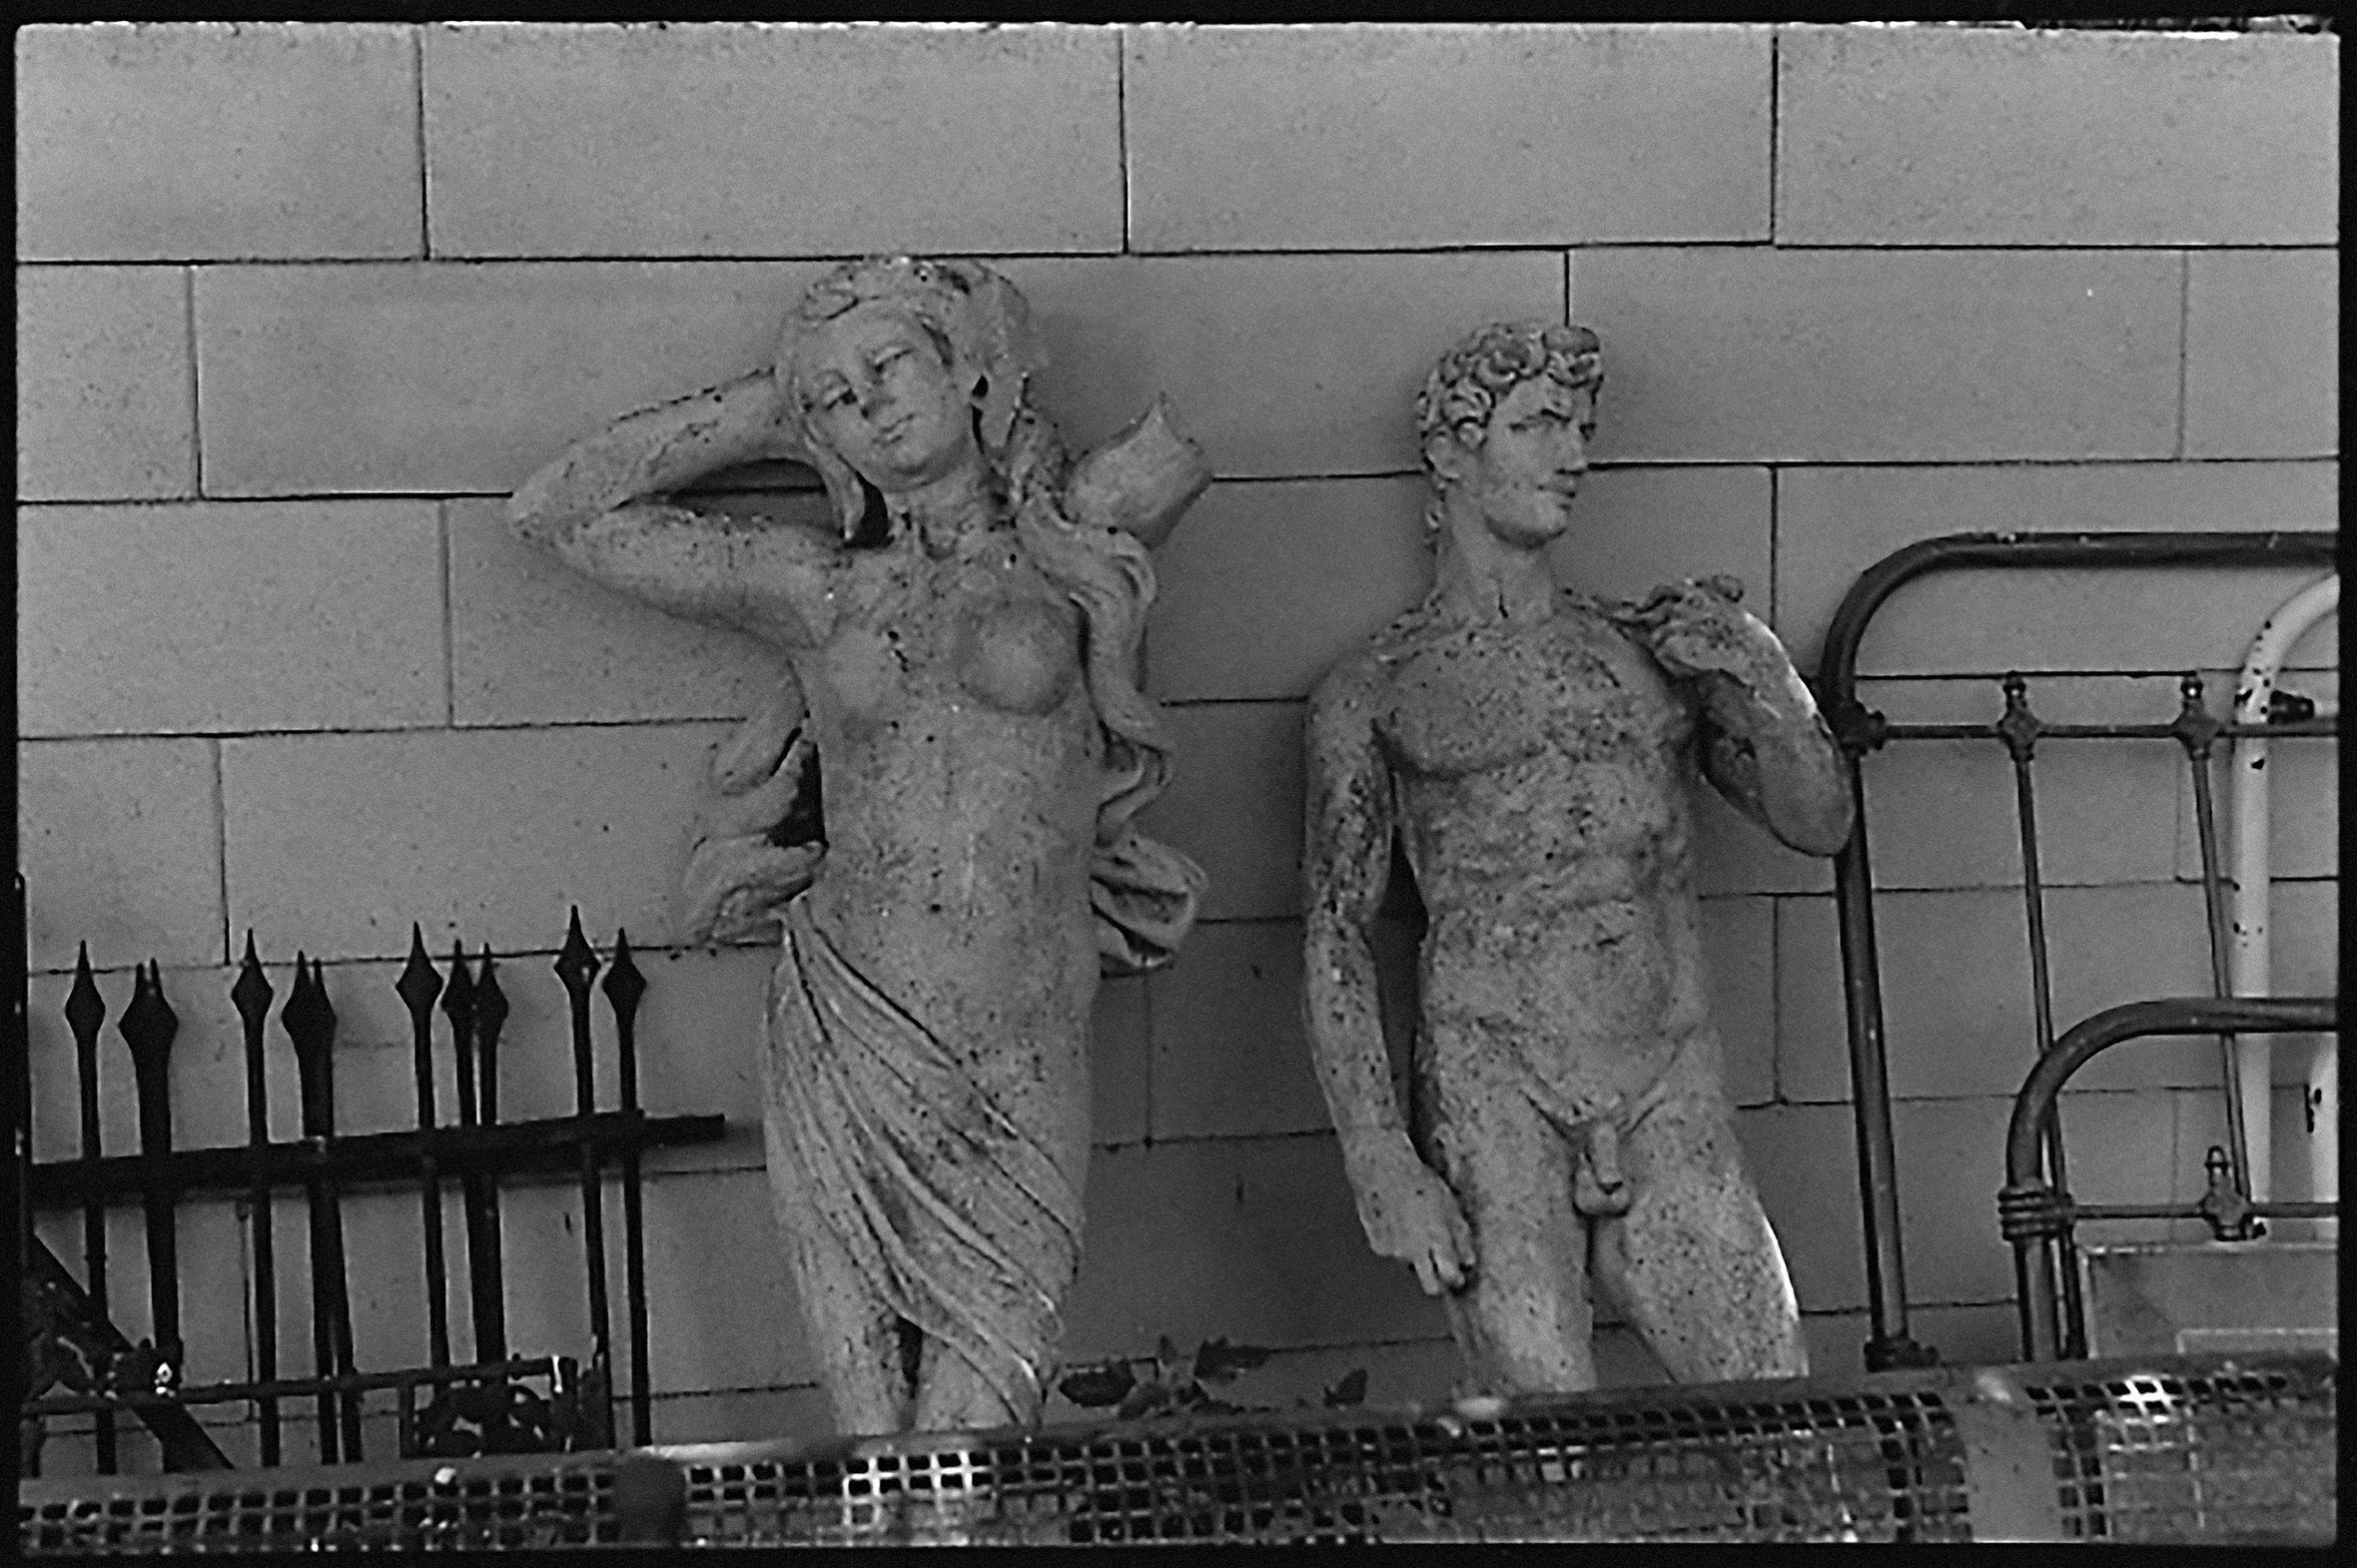 Two statues propped against a wall in a storage area amid decorative metal fencing. A statue of a mostly nude female on the left and a replica of Michelangelo’s David on the right.